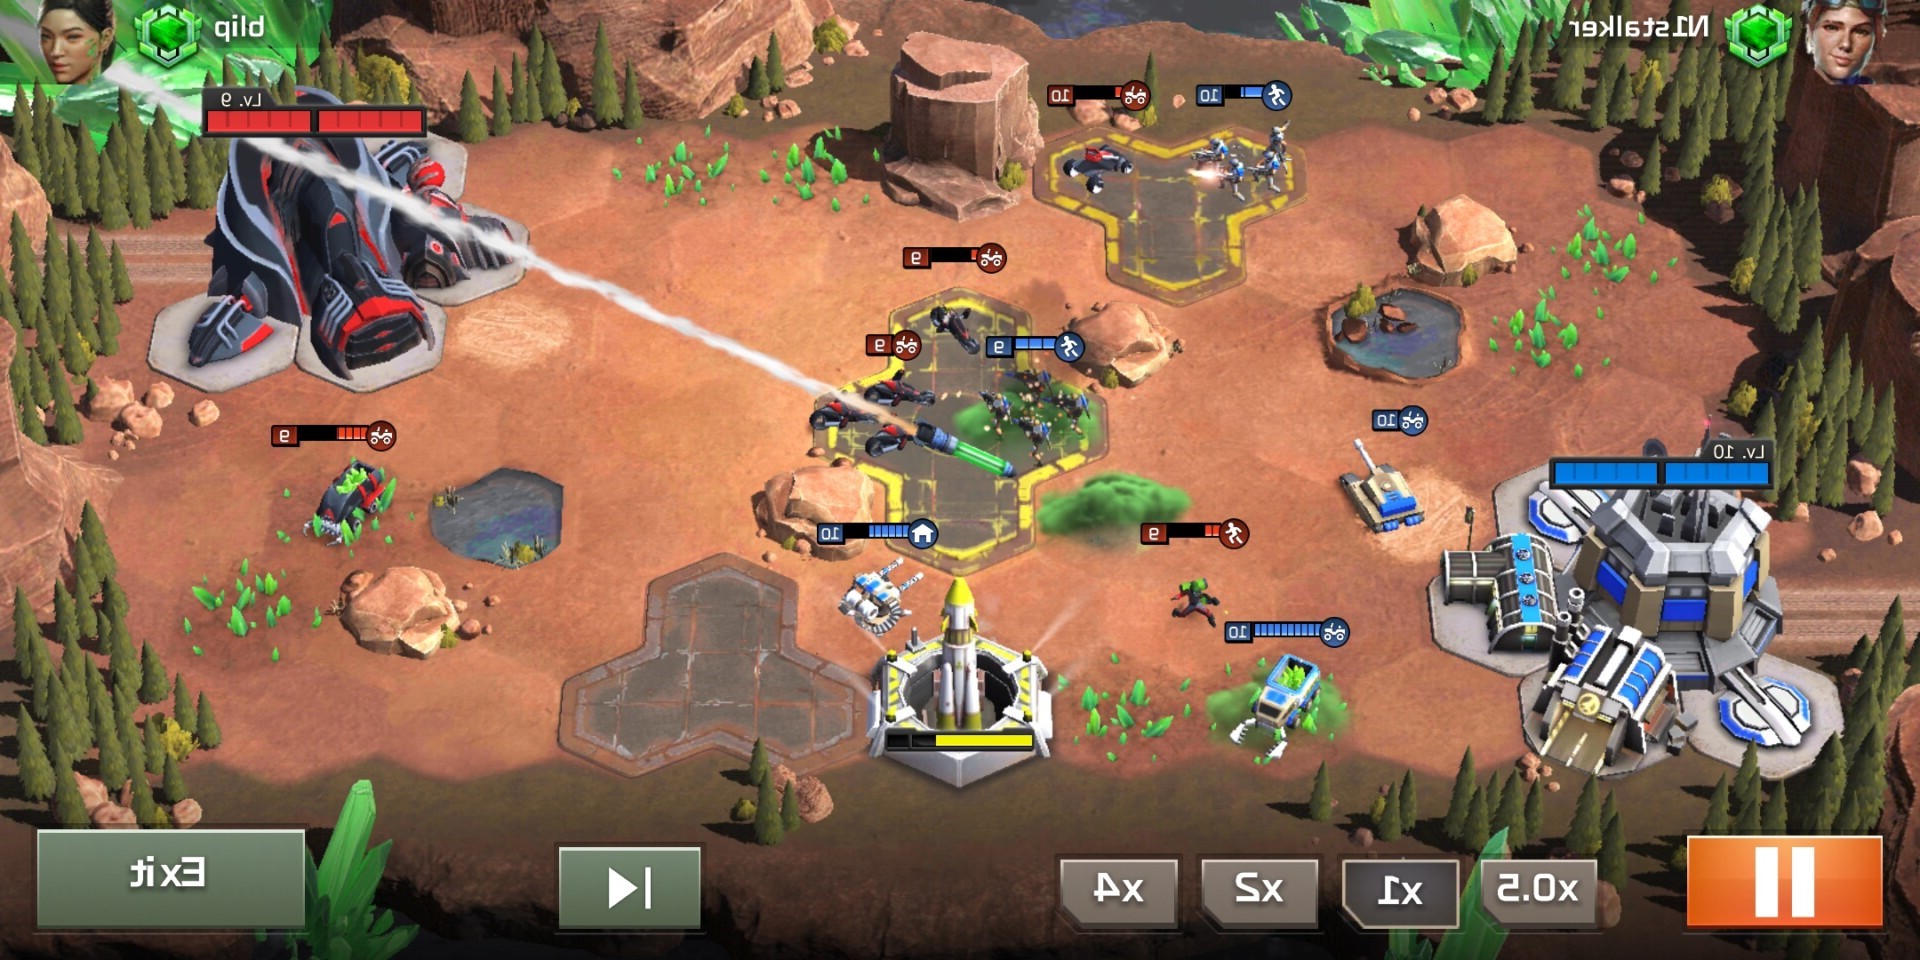 Command-and-conquer-rivals-review-battlefield.